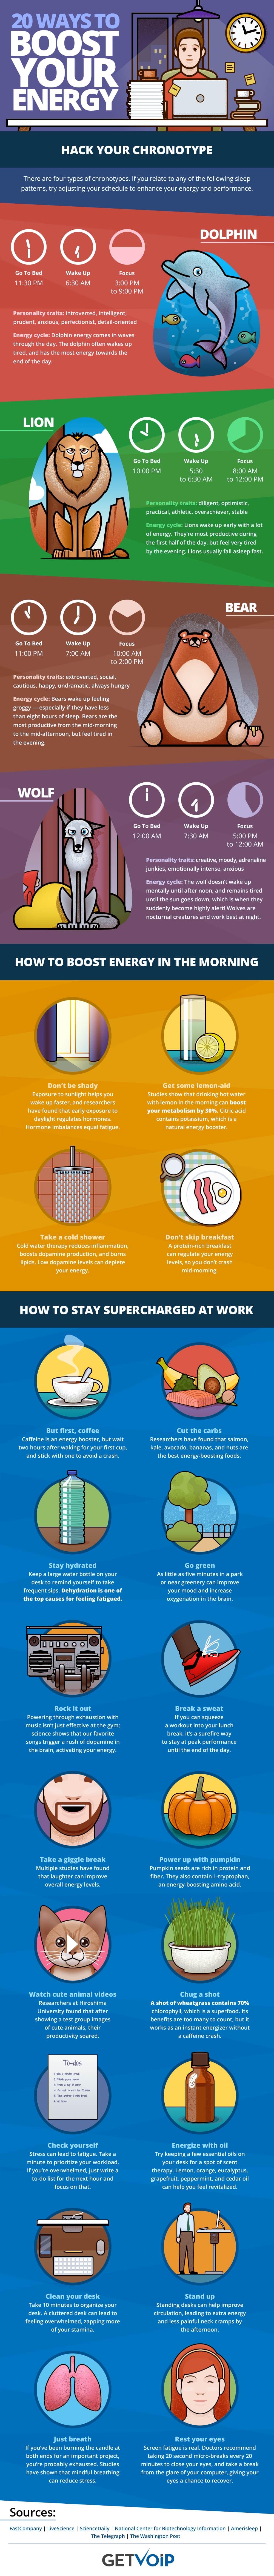 How to Get More Energy Infographic